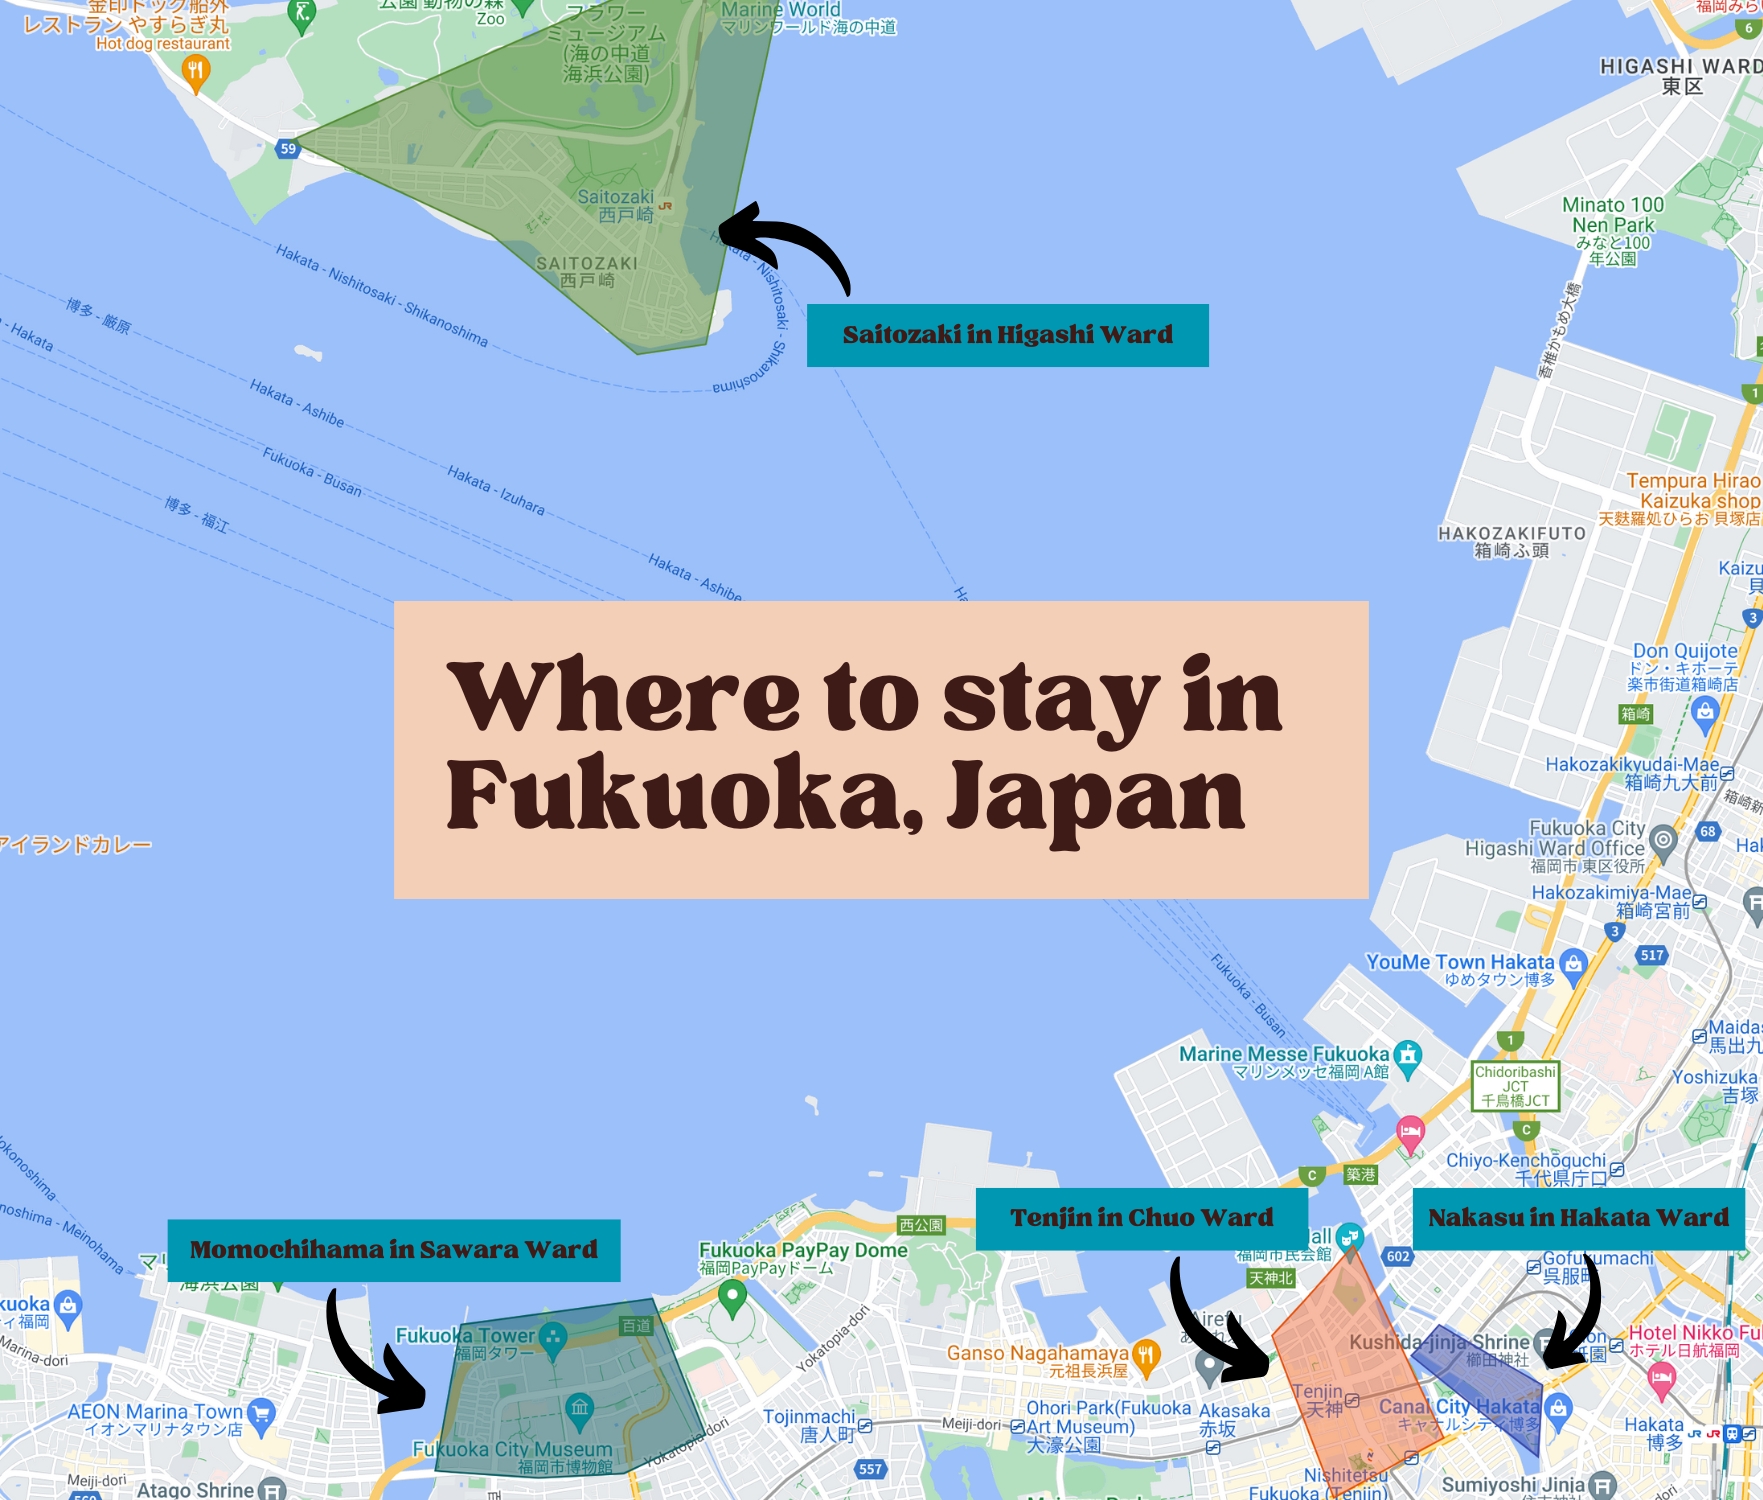 Where to stay in Fukuoka map